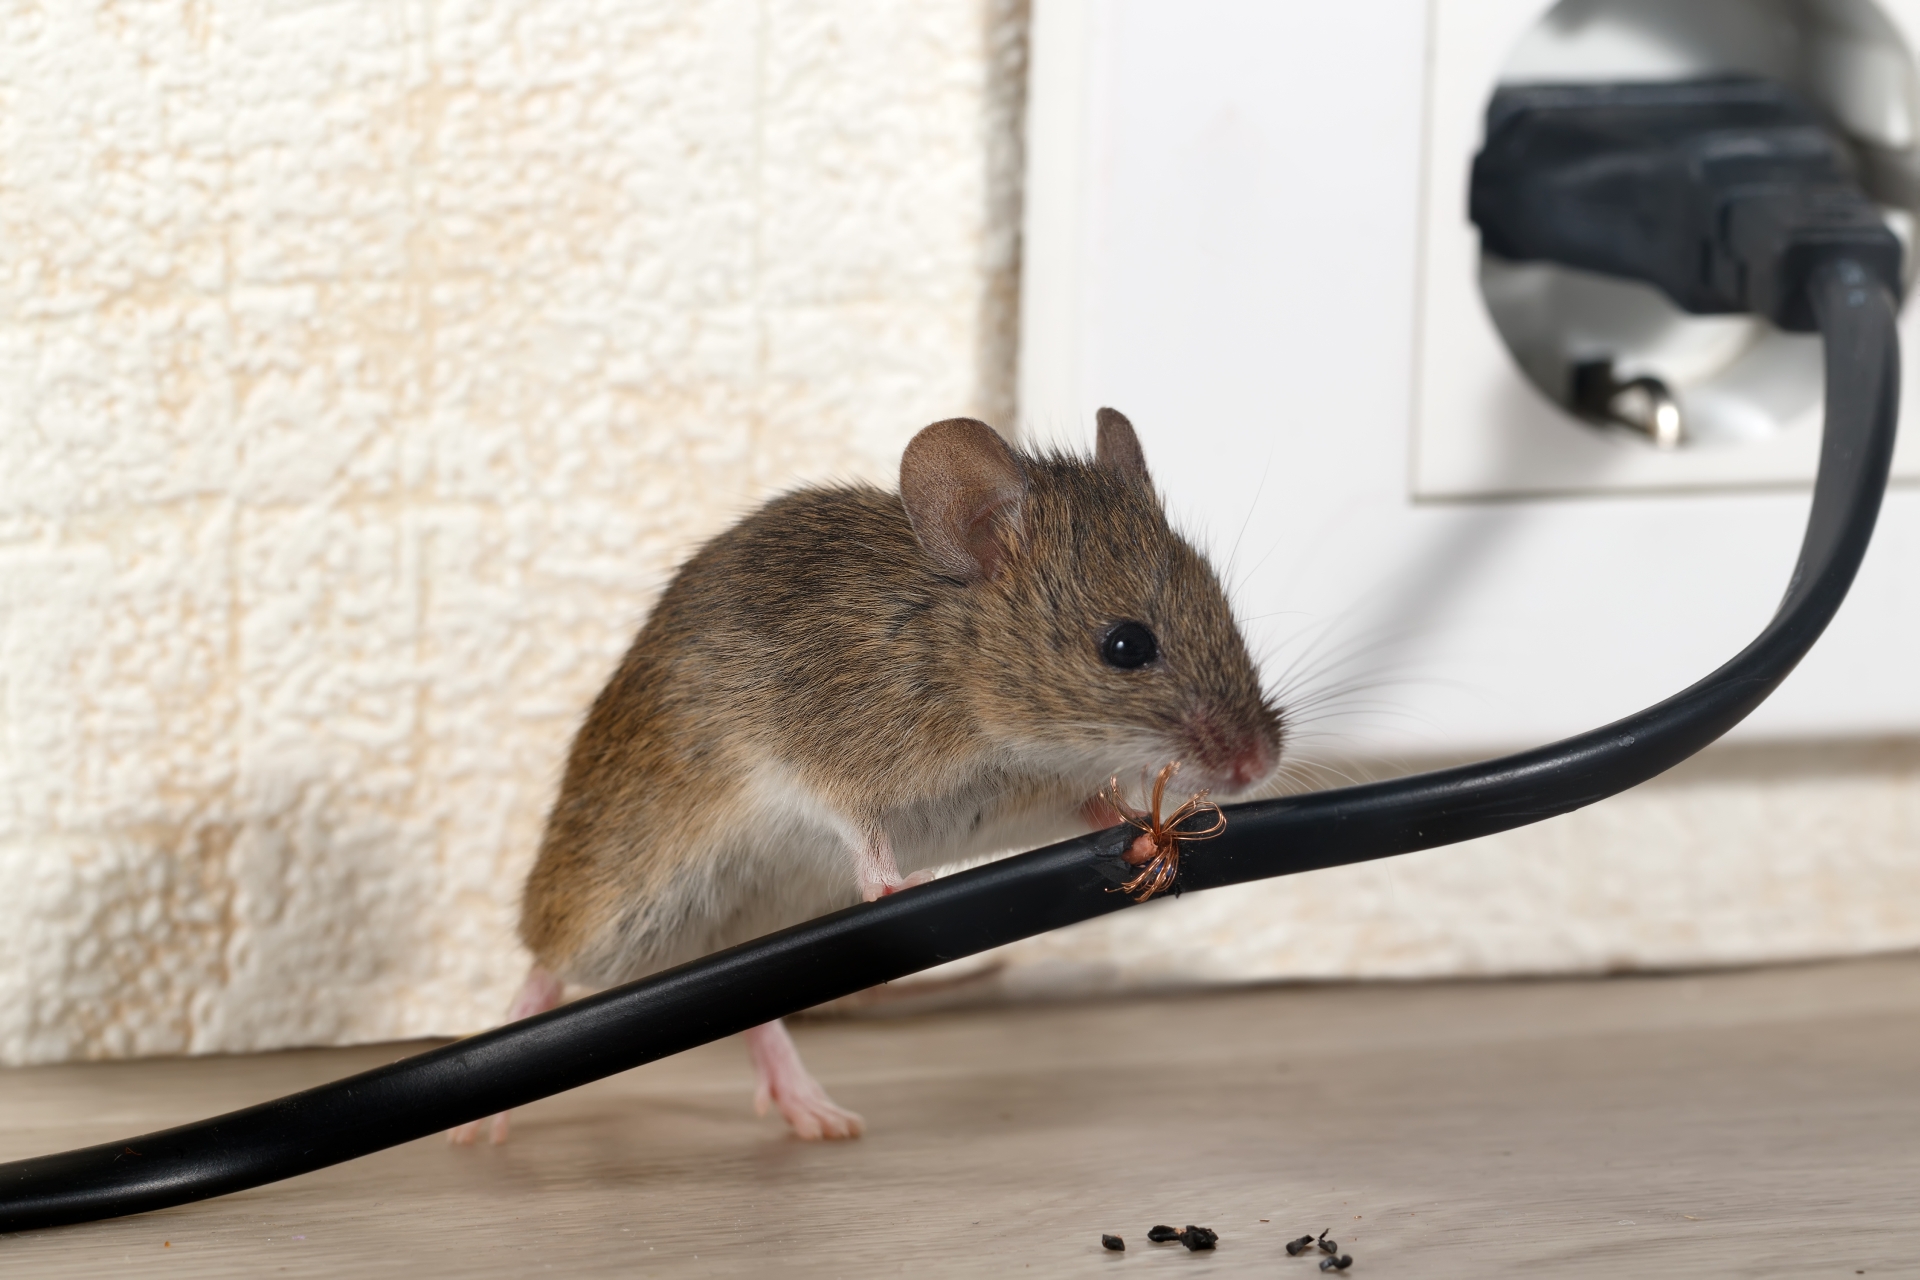 Mice Infestation, Pest Control in Erith Marshes, DA18. Call Now 020 8166 9746